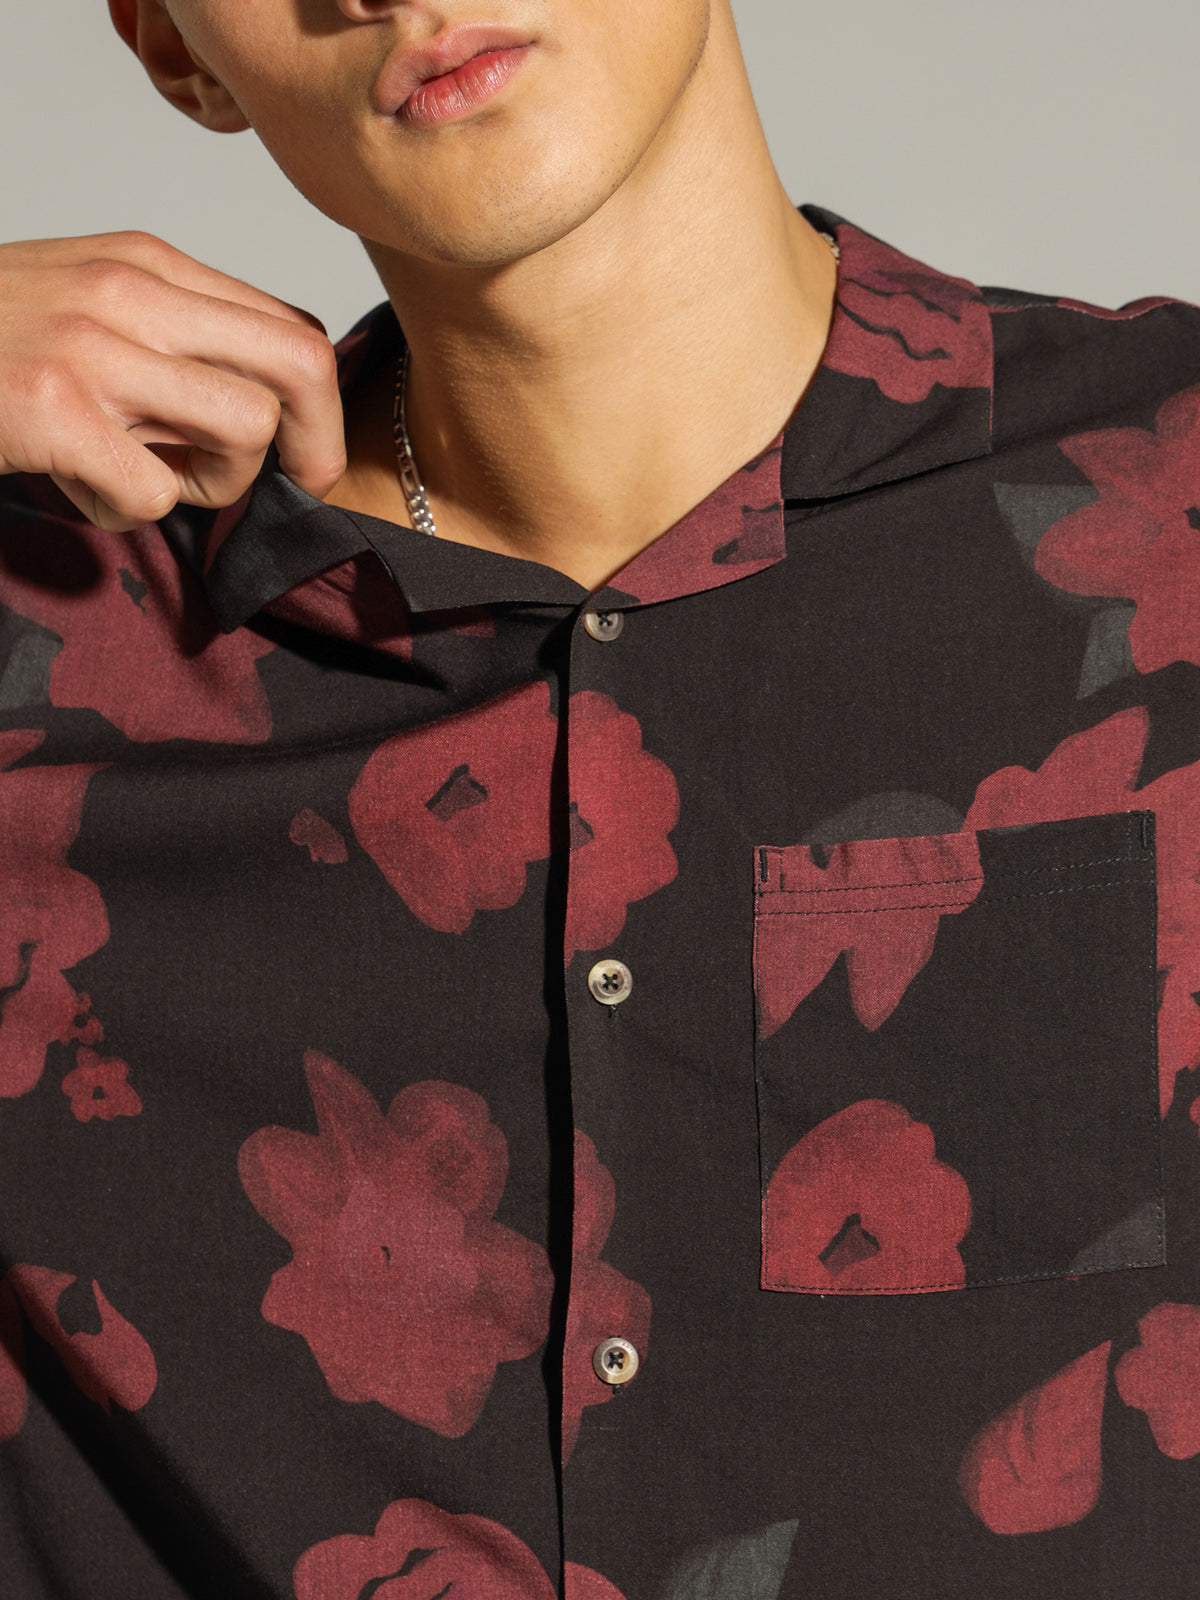 Pablo Shirt in Red Rose